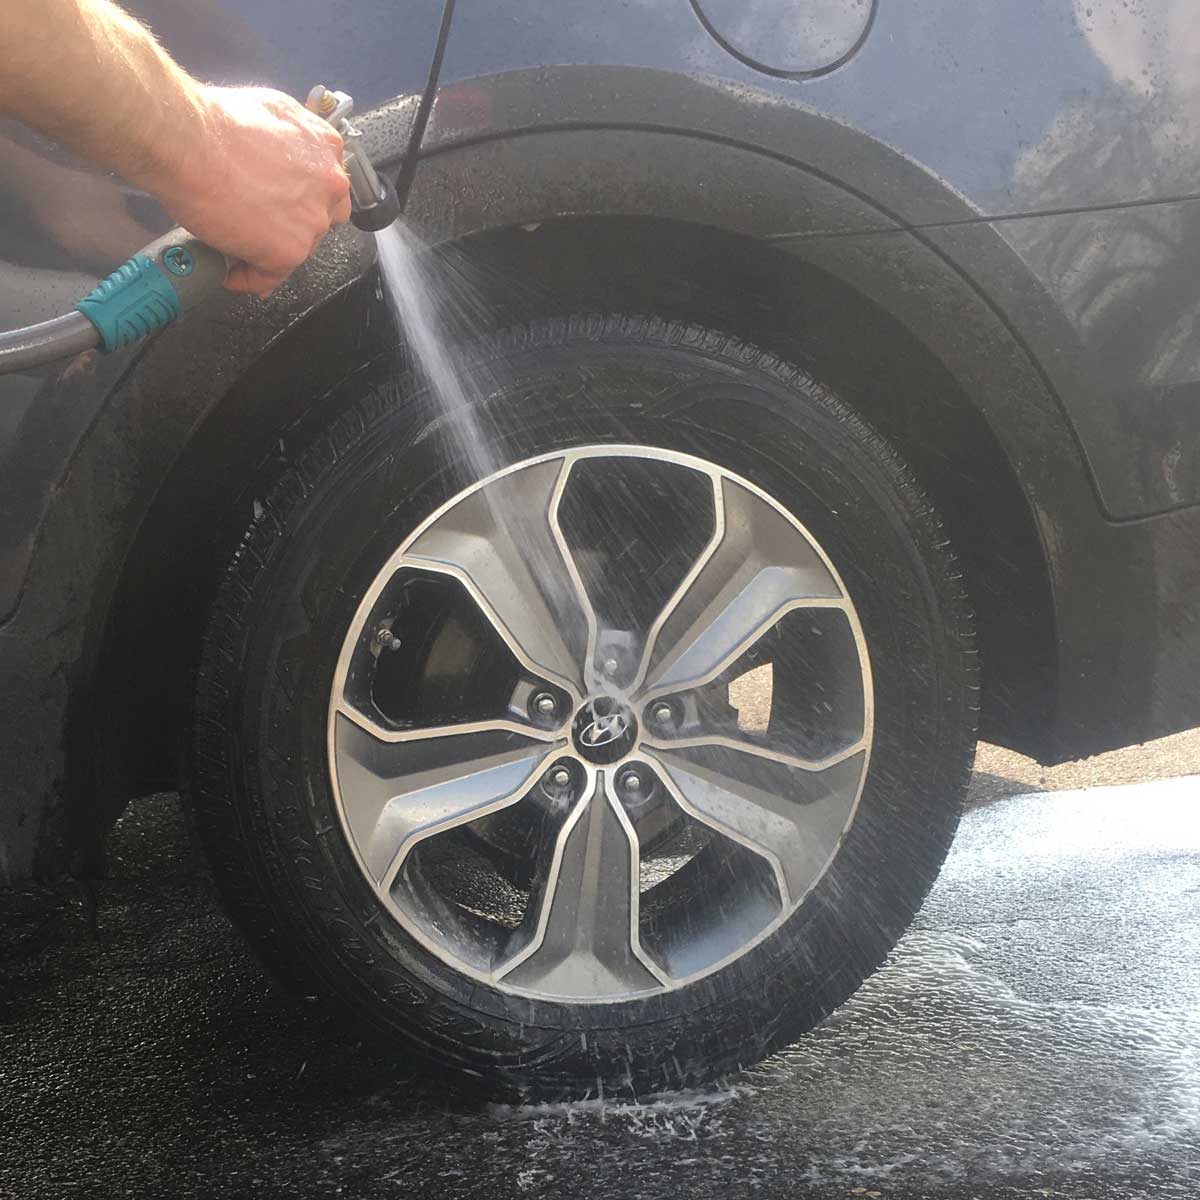 How to Properly Clean Car Tires